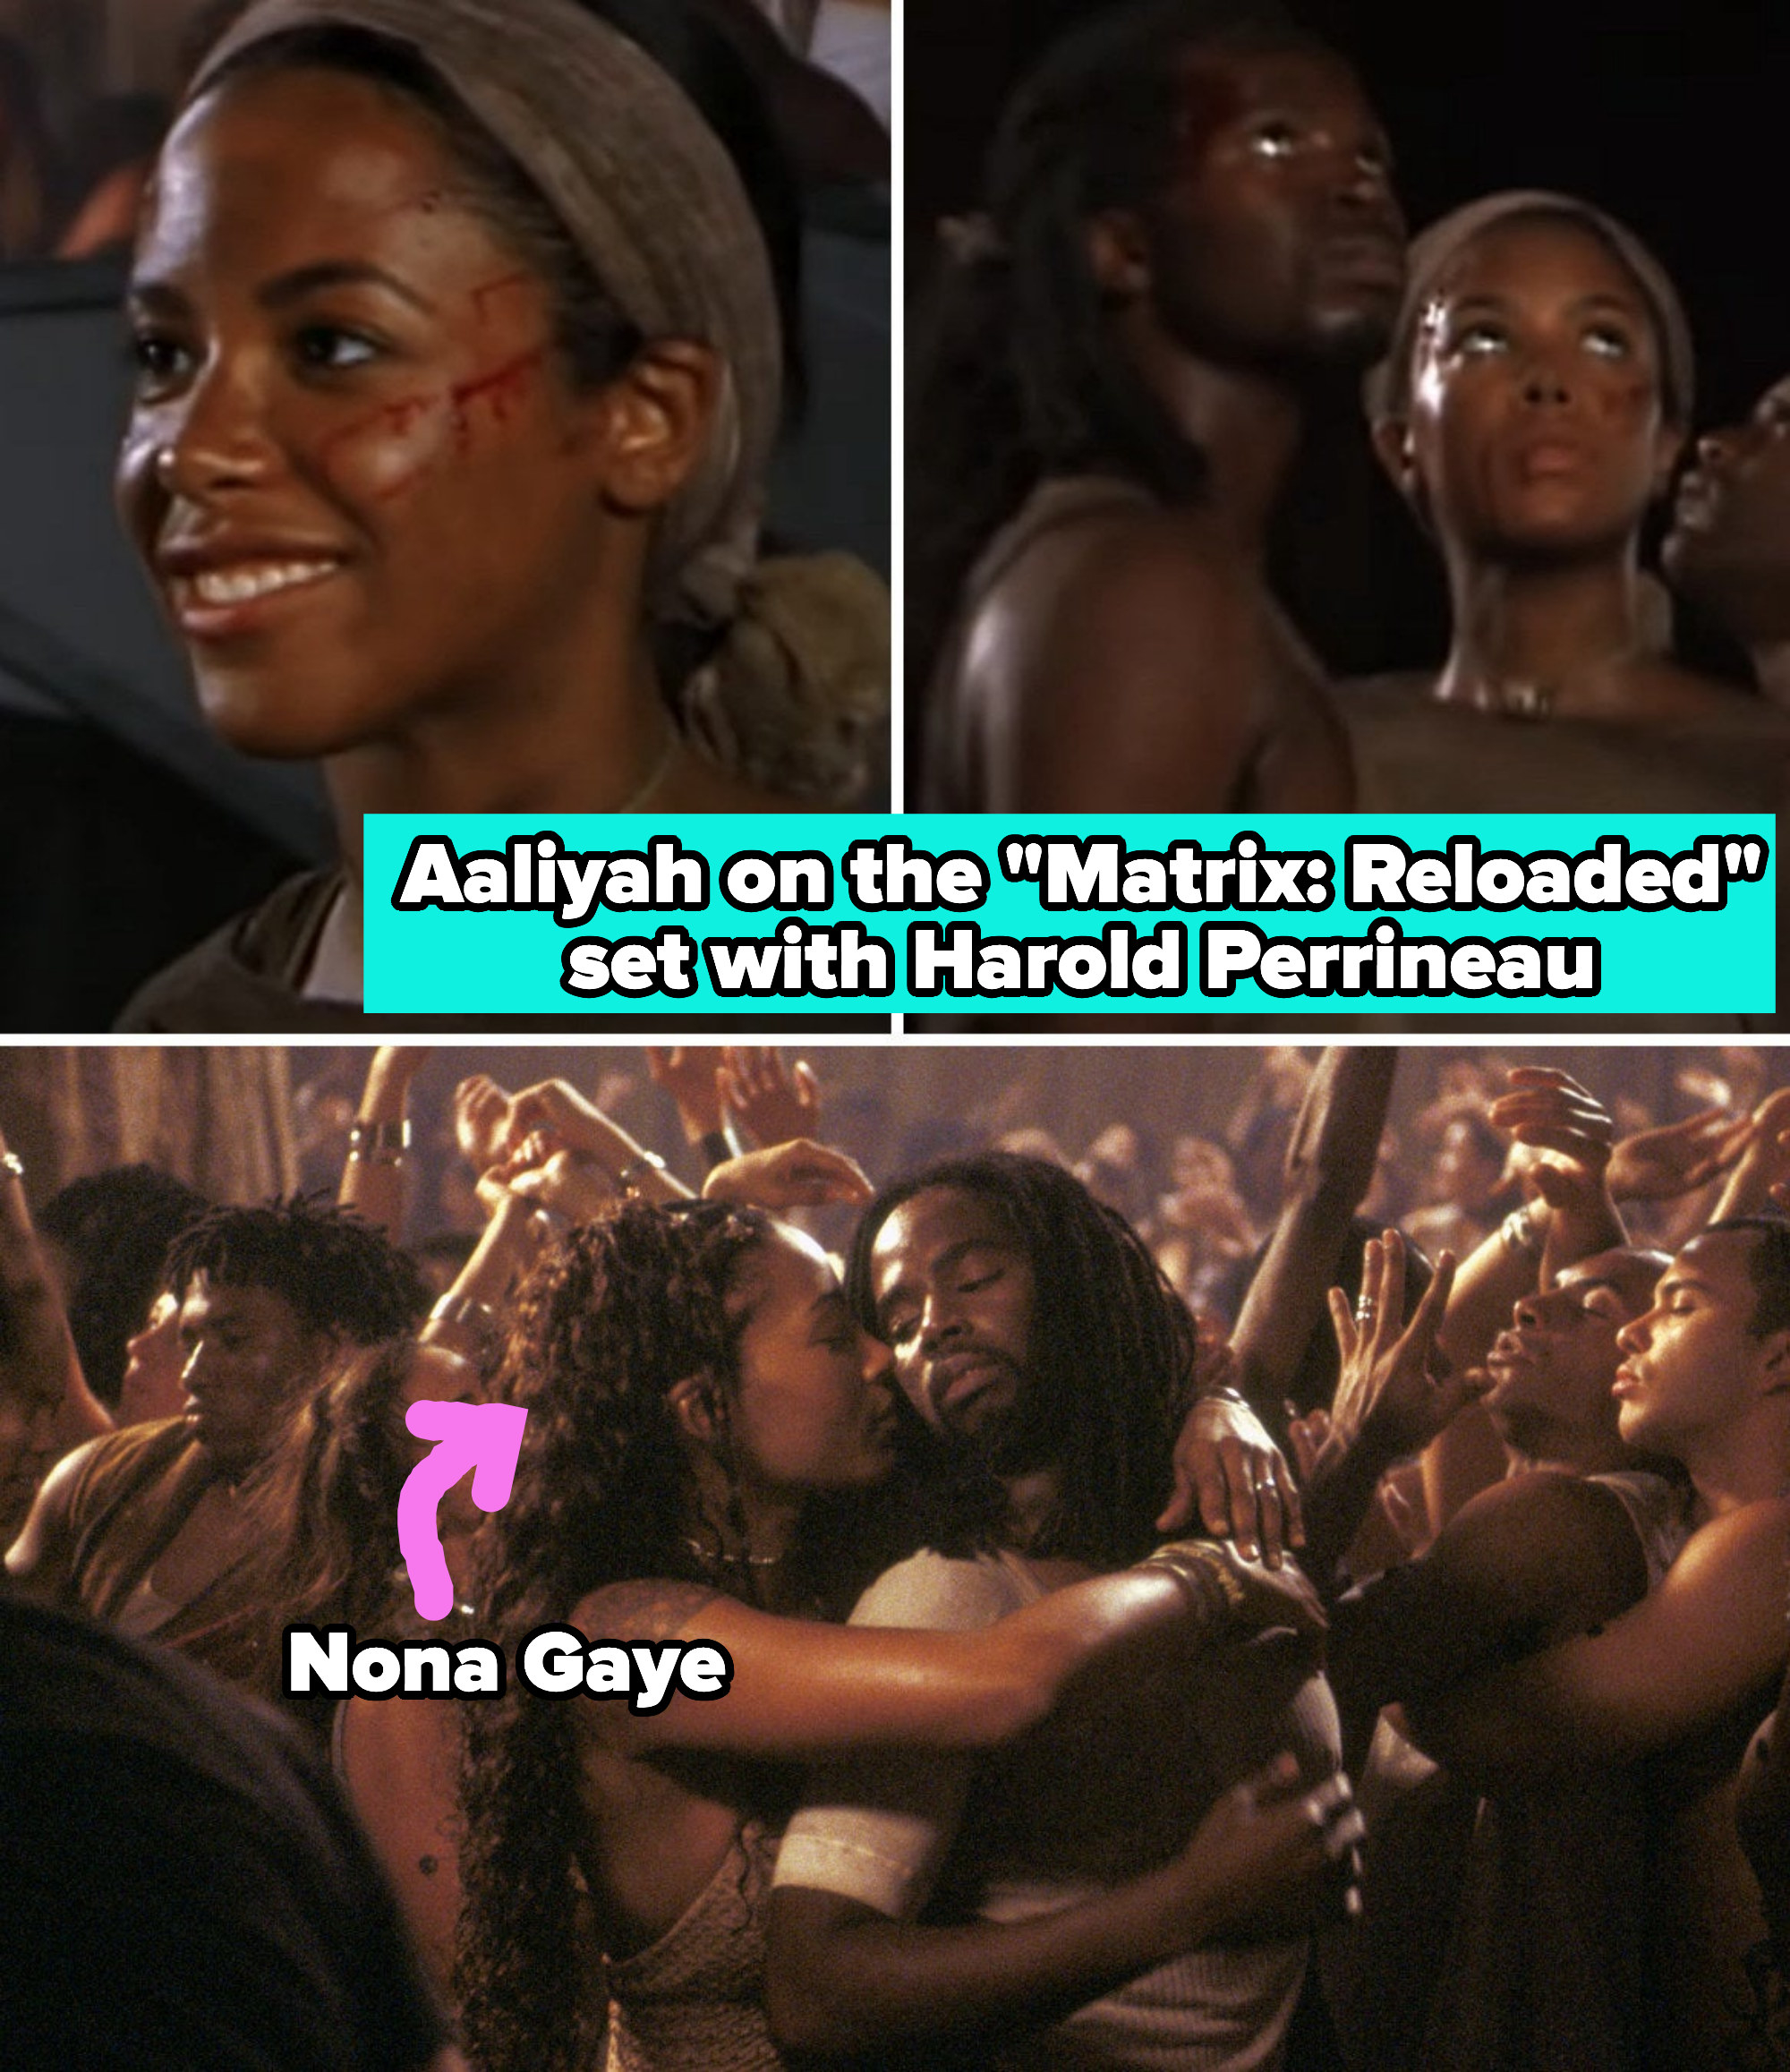 behind-the-scenes images of Aaliyah filming The Matrix: Reloaded juxtaposed with Nona Gaye in the released version of the film